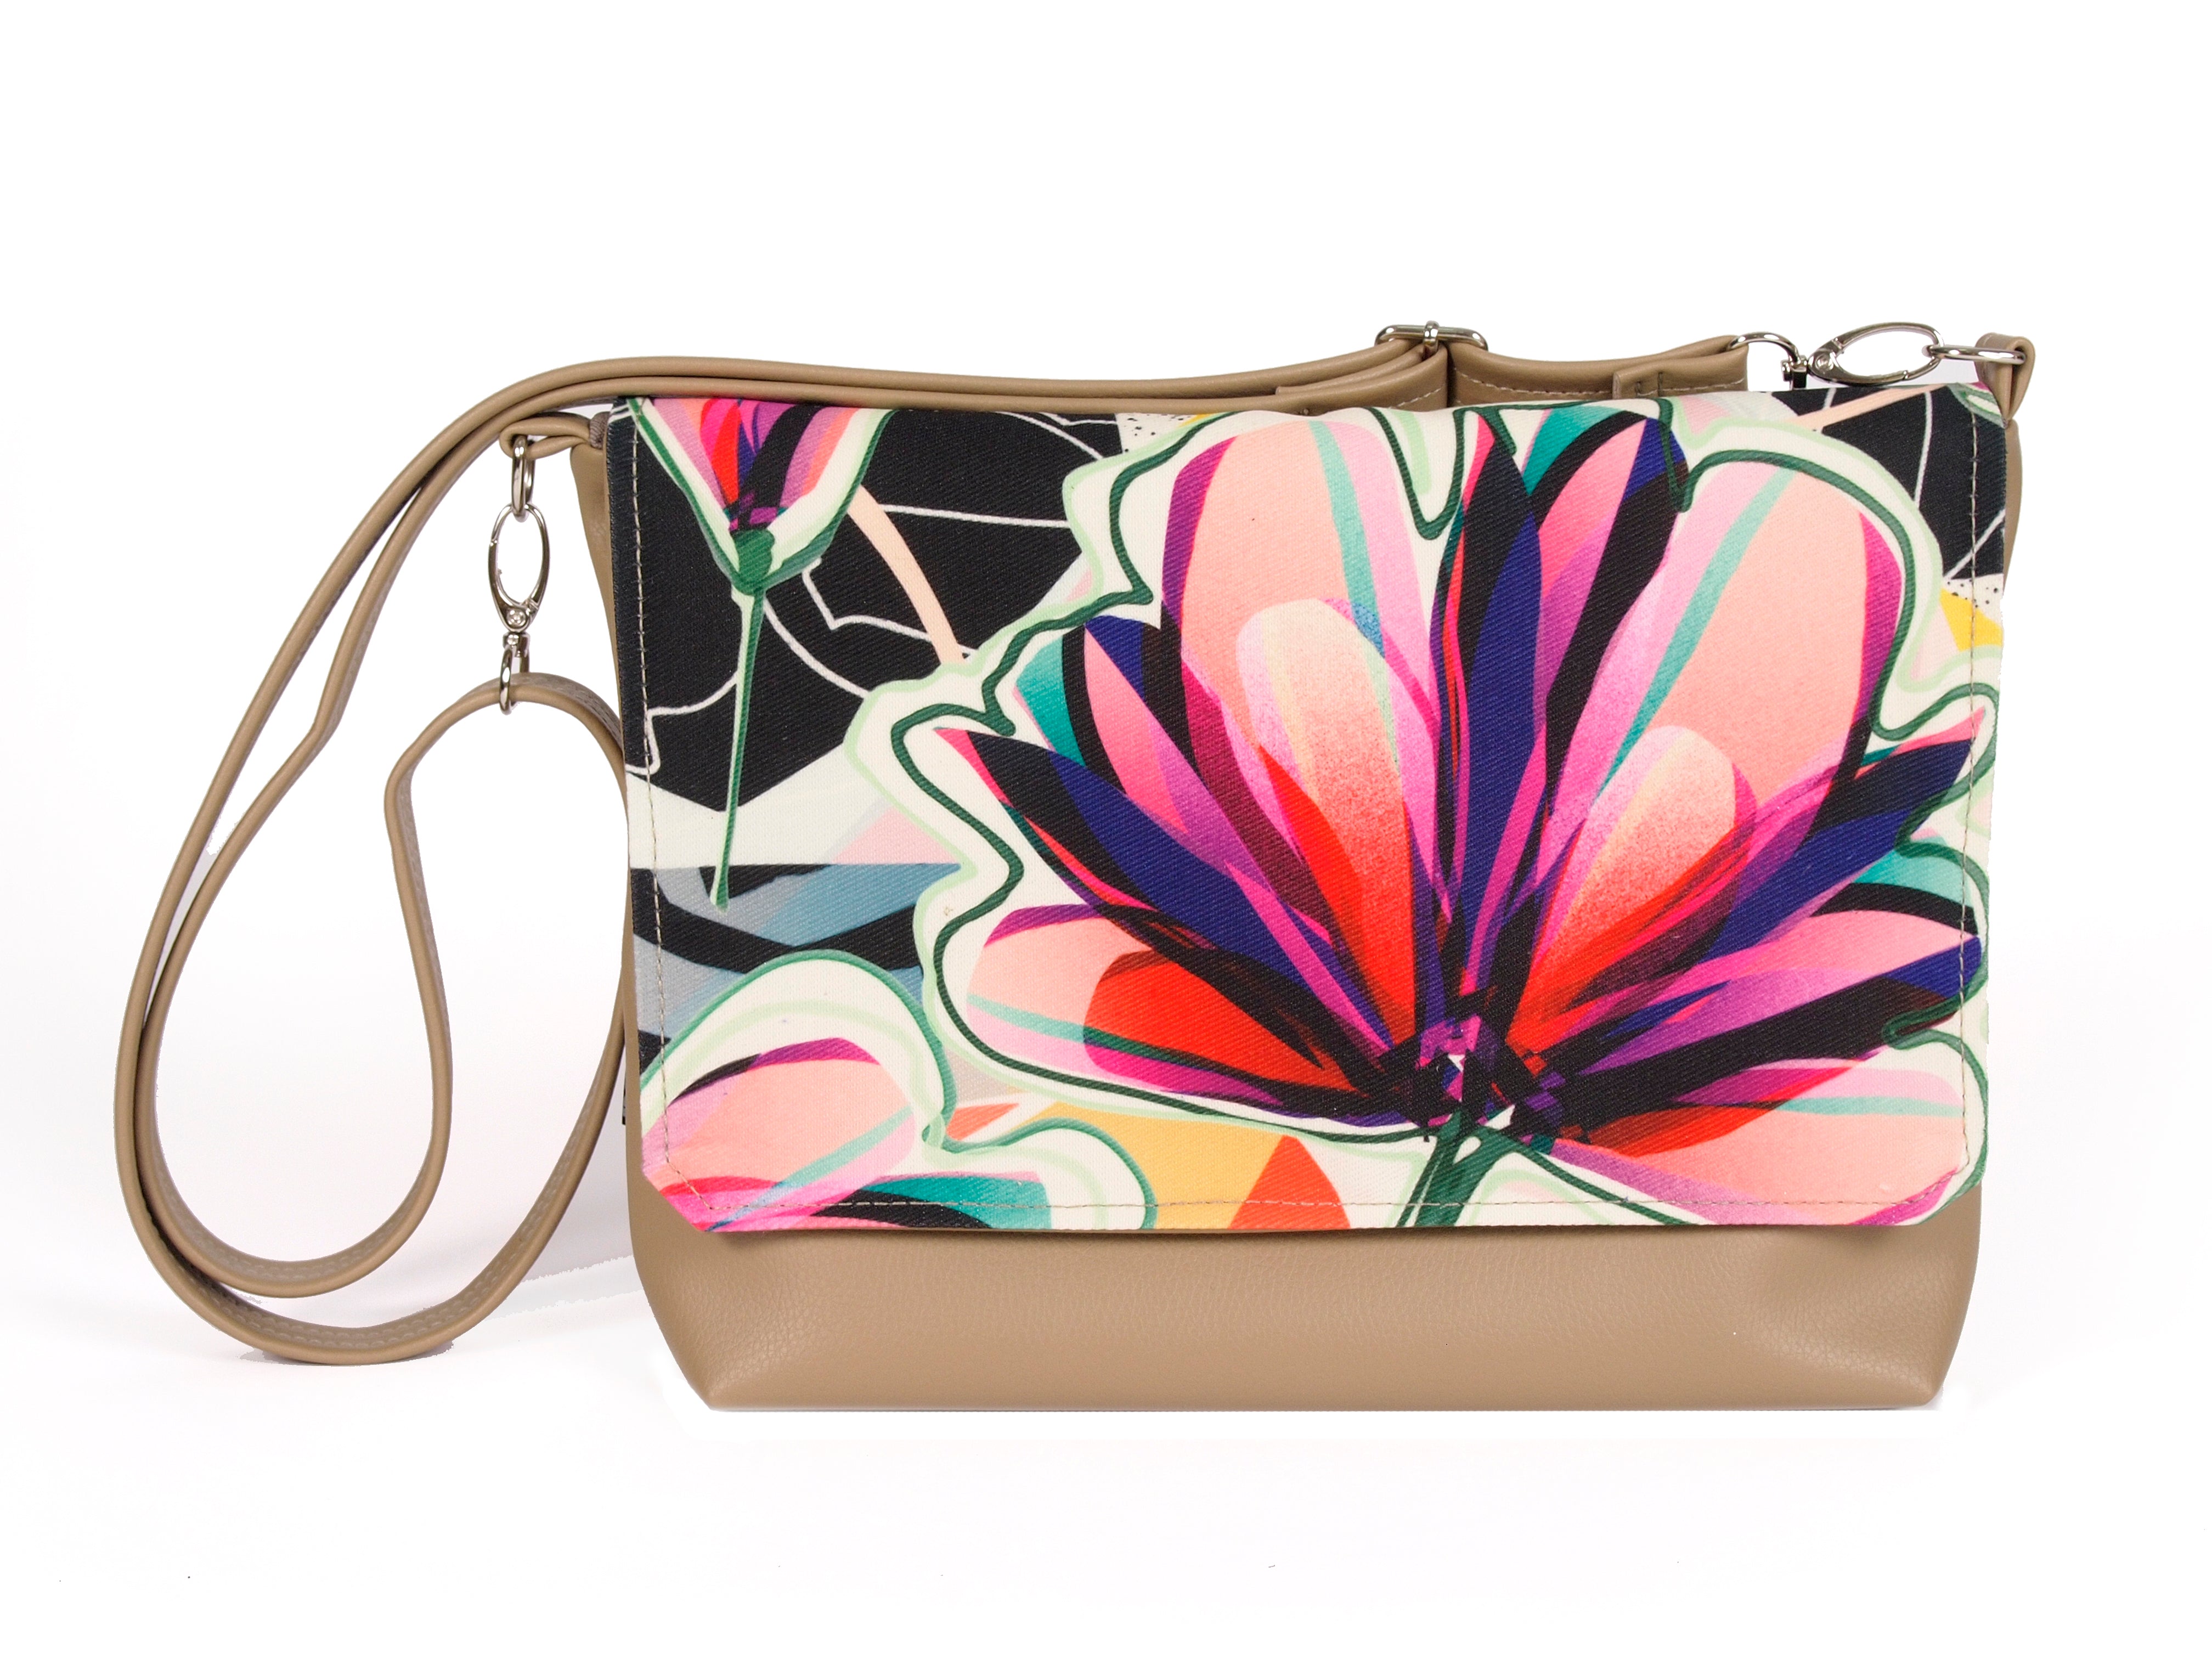 Bardo small bag - Тenderness - Premium Bardo small bag from Bardo bag - Just lvblack, floral, flower, gift, green, handemade, orange, painted patterns, pink, purple, red, urban style, woman59.00! Shop now at BARDO ART WORKS